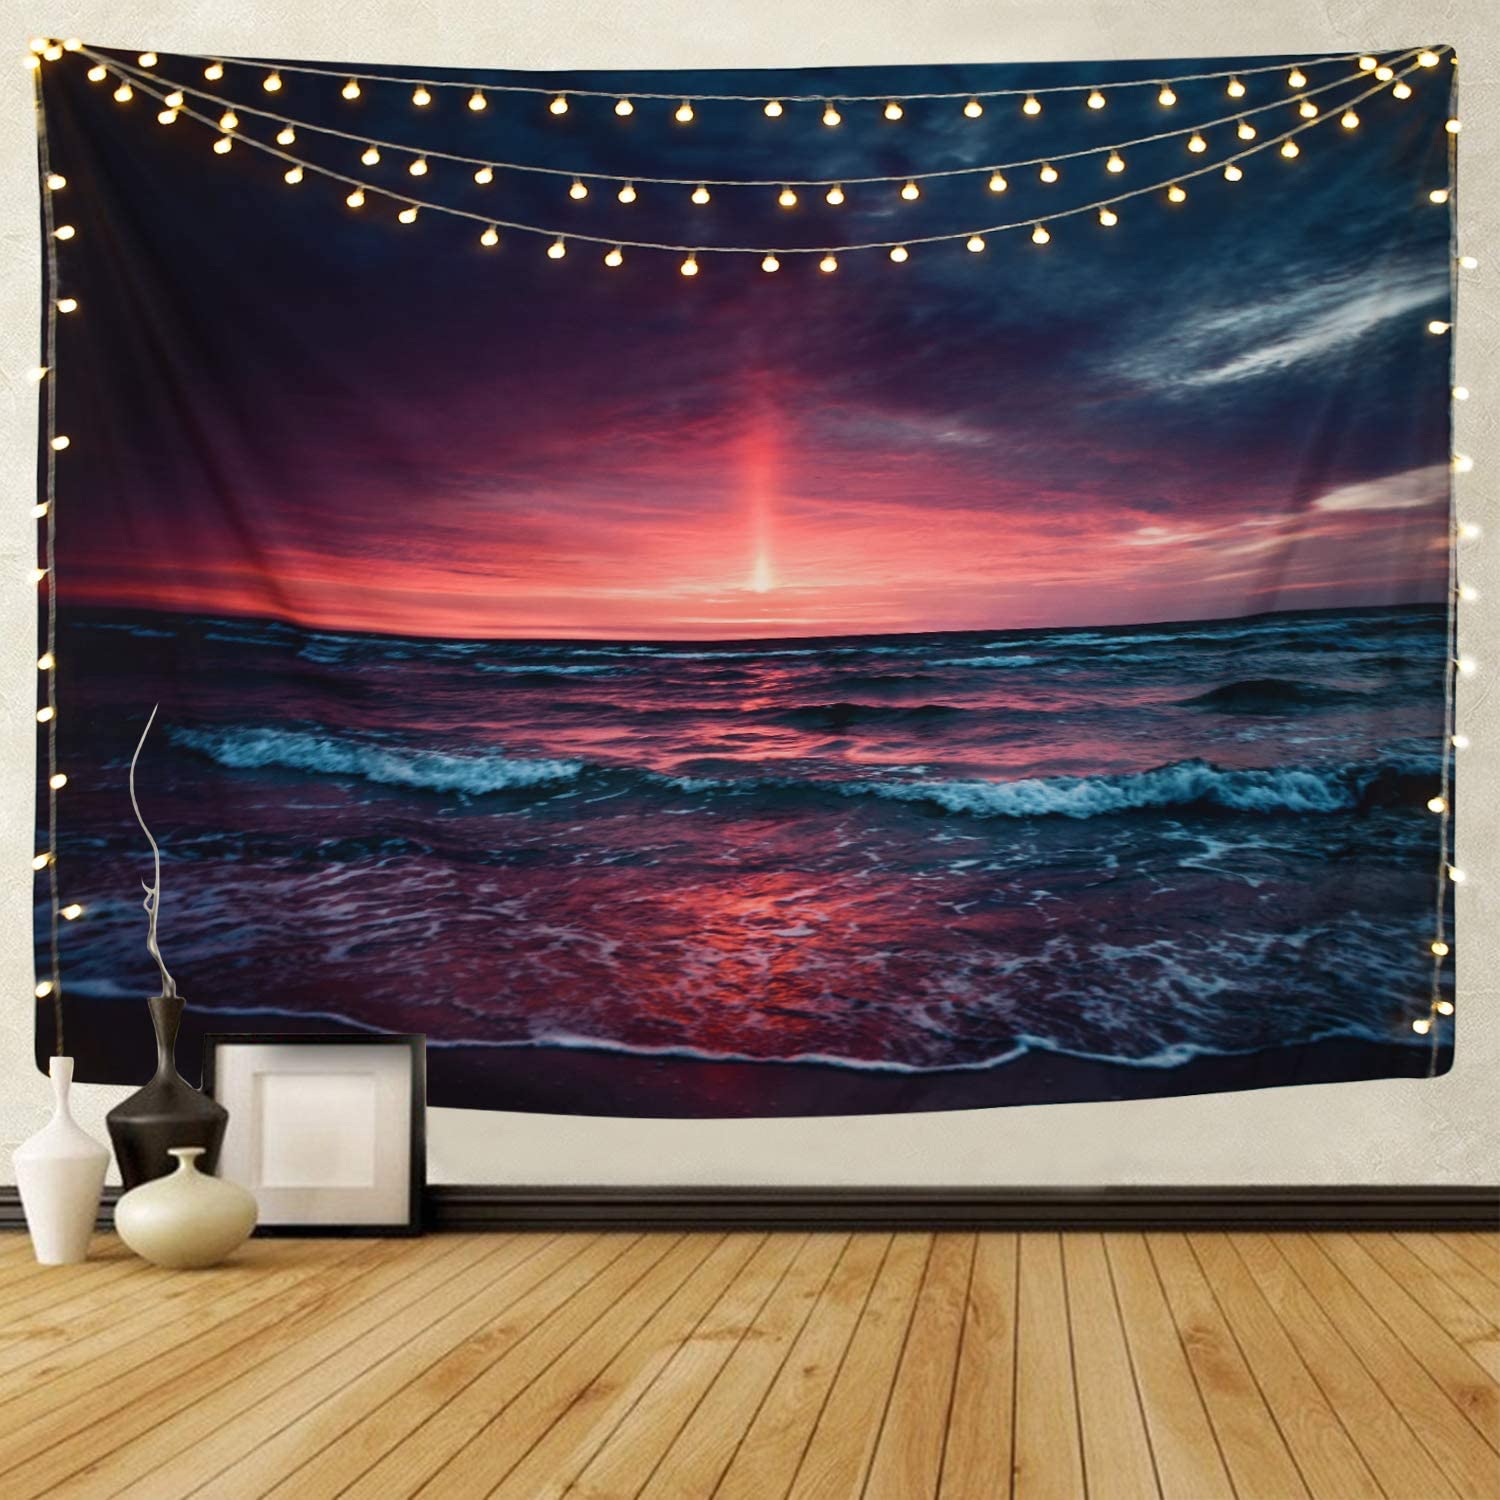 How to Choose a Wall Tapestry for Your Home